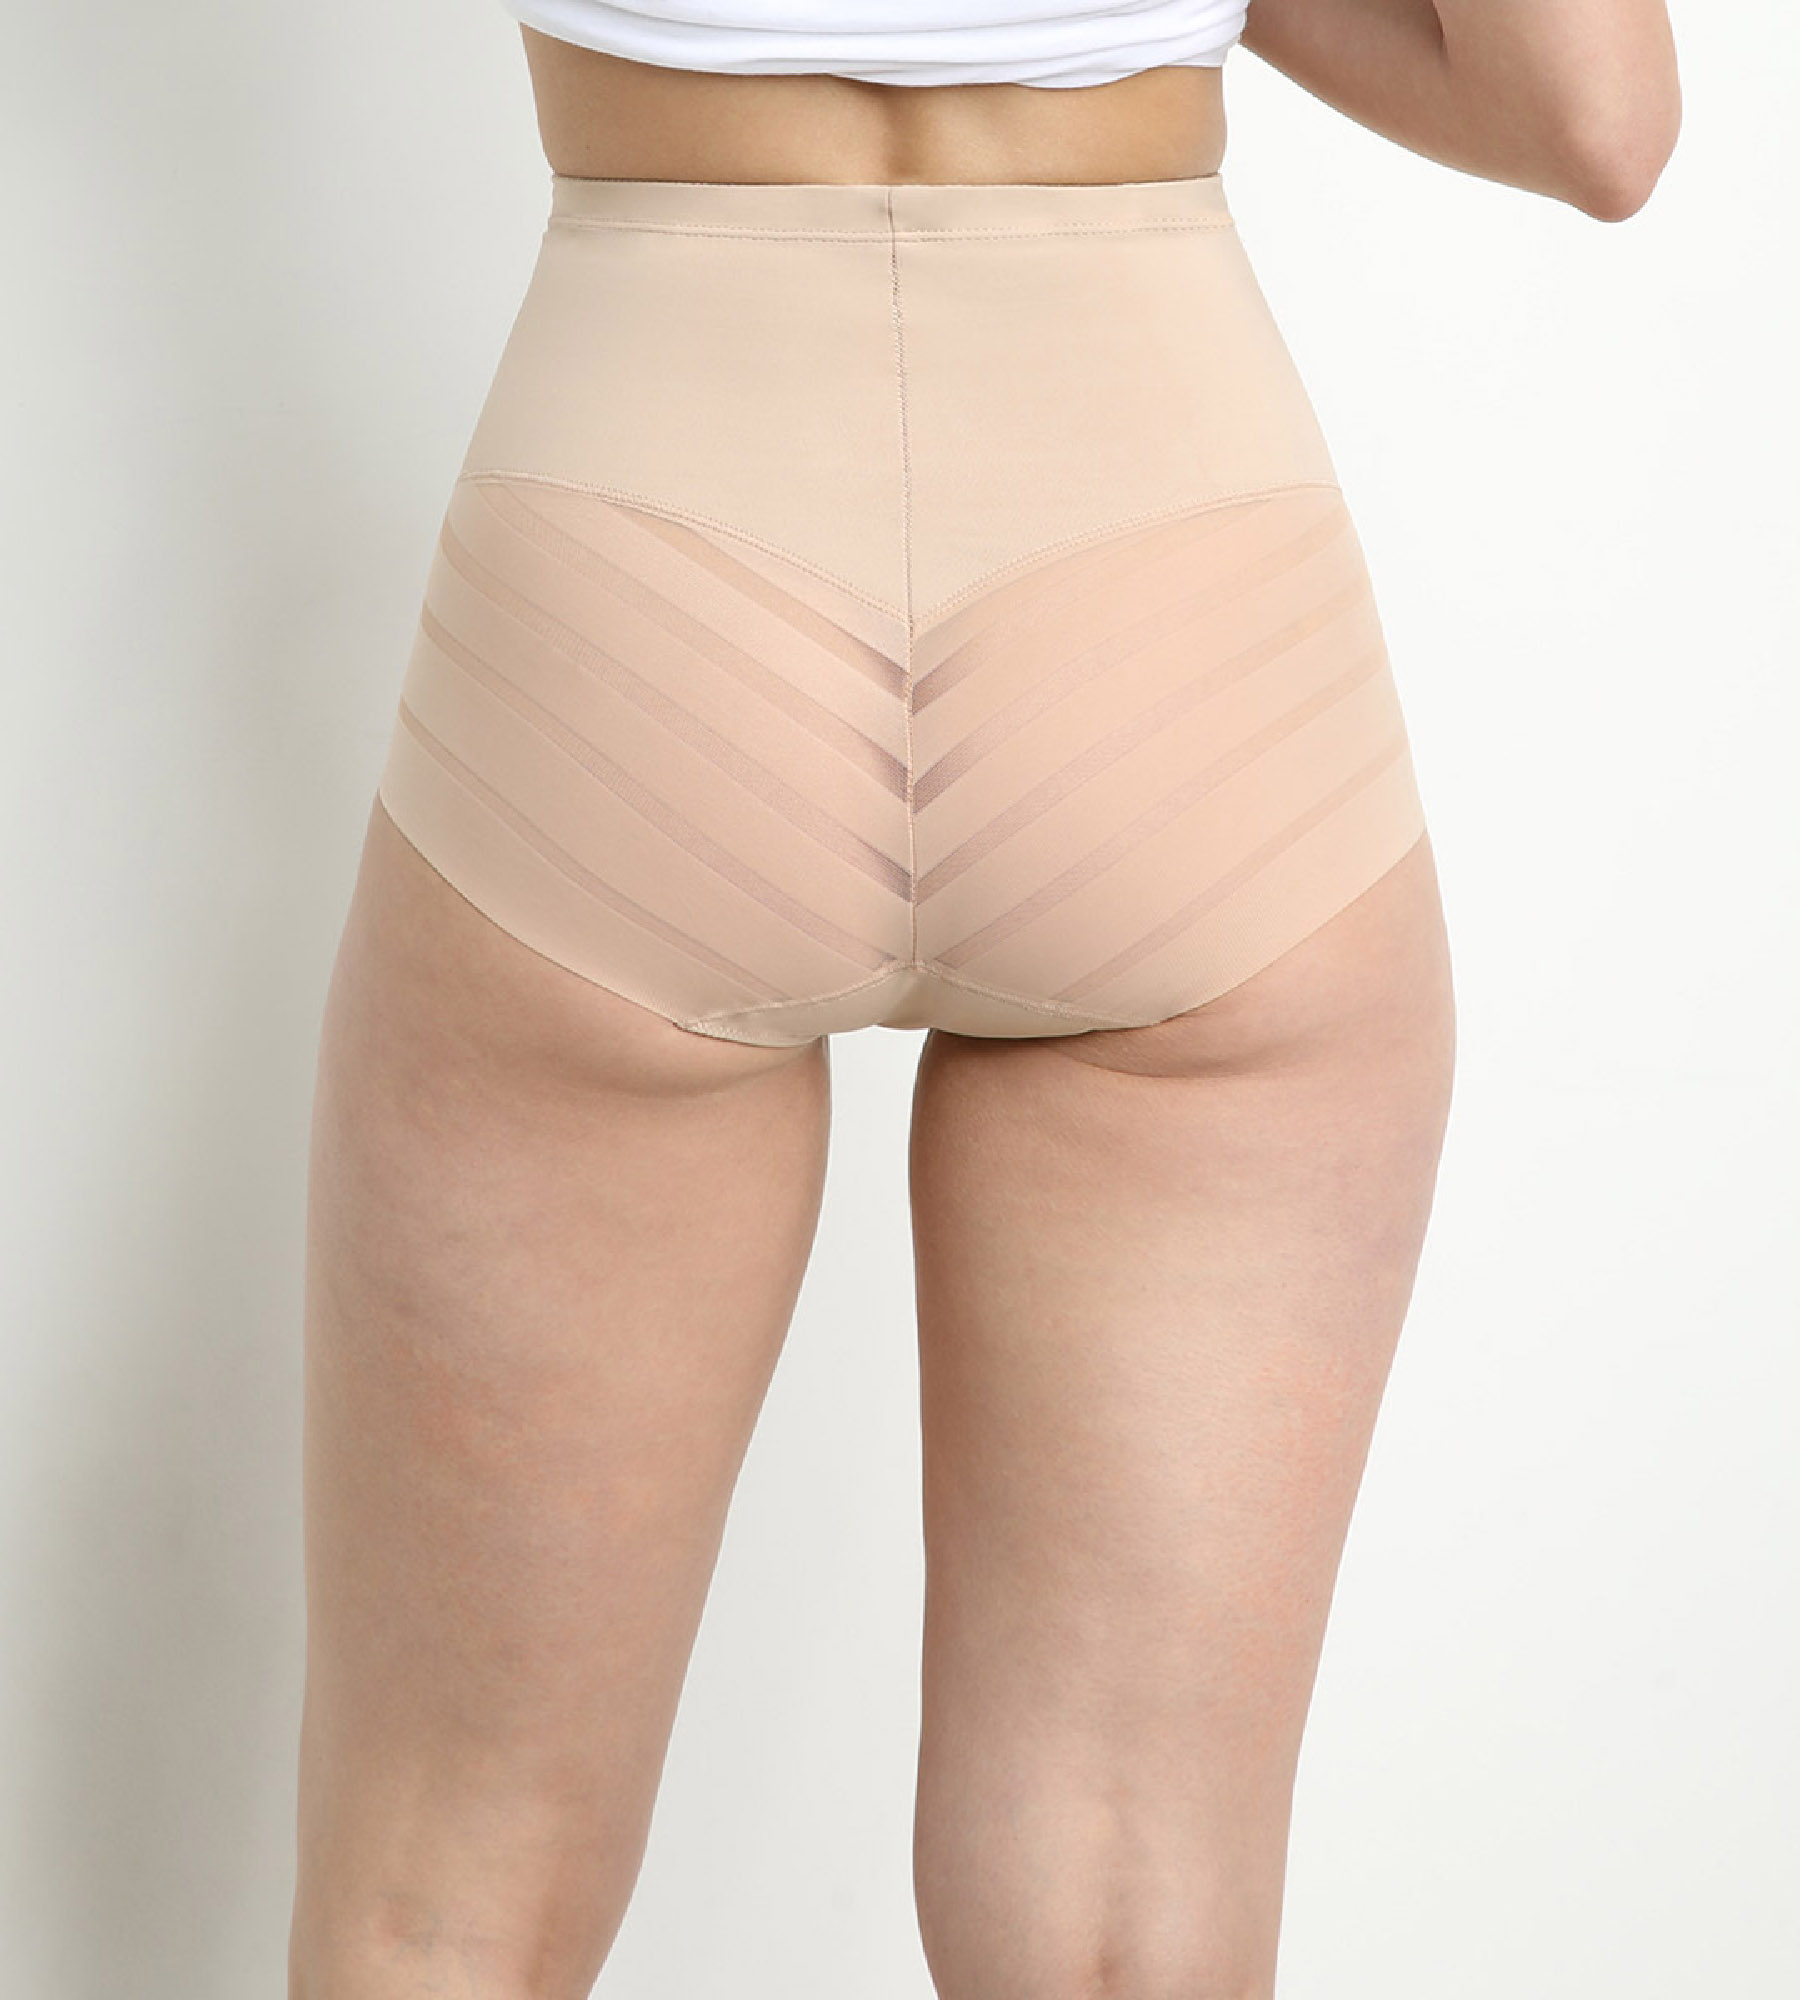 Diam's Control Tummy Slimming Knickers In Nude, 44% OFF